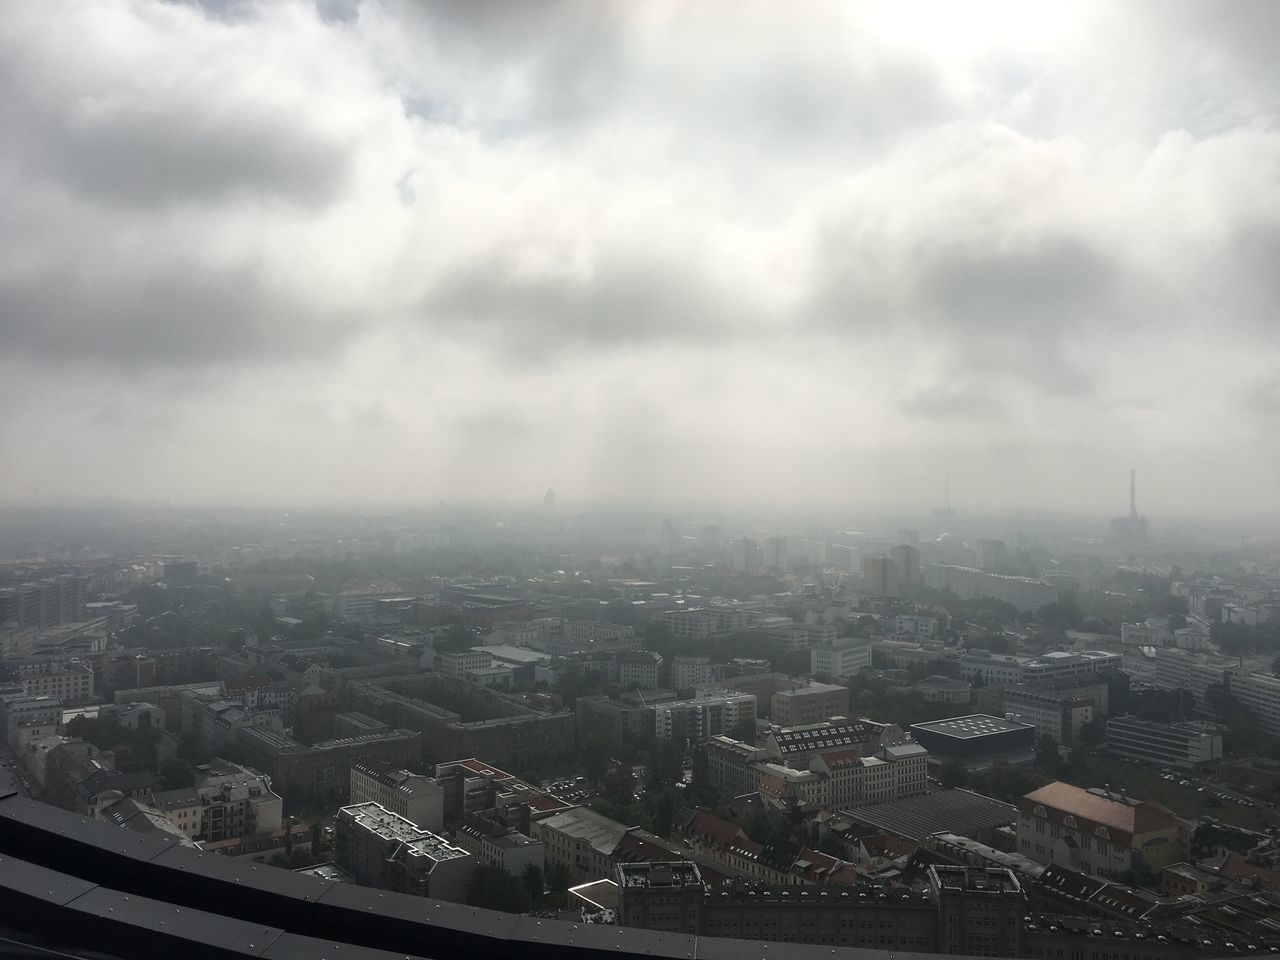 AERIAL VIEW OF CITY AGAINST STORM CLOUDS